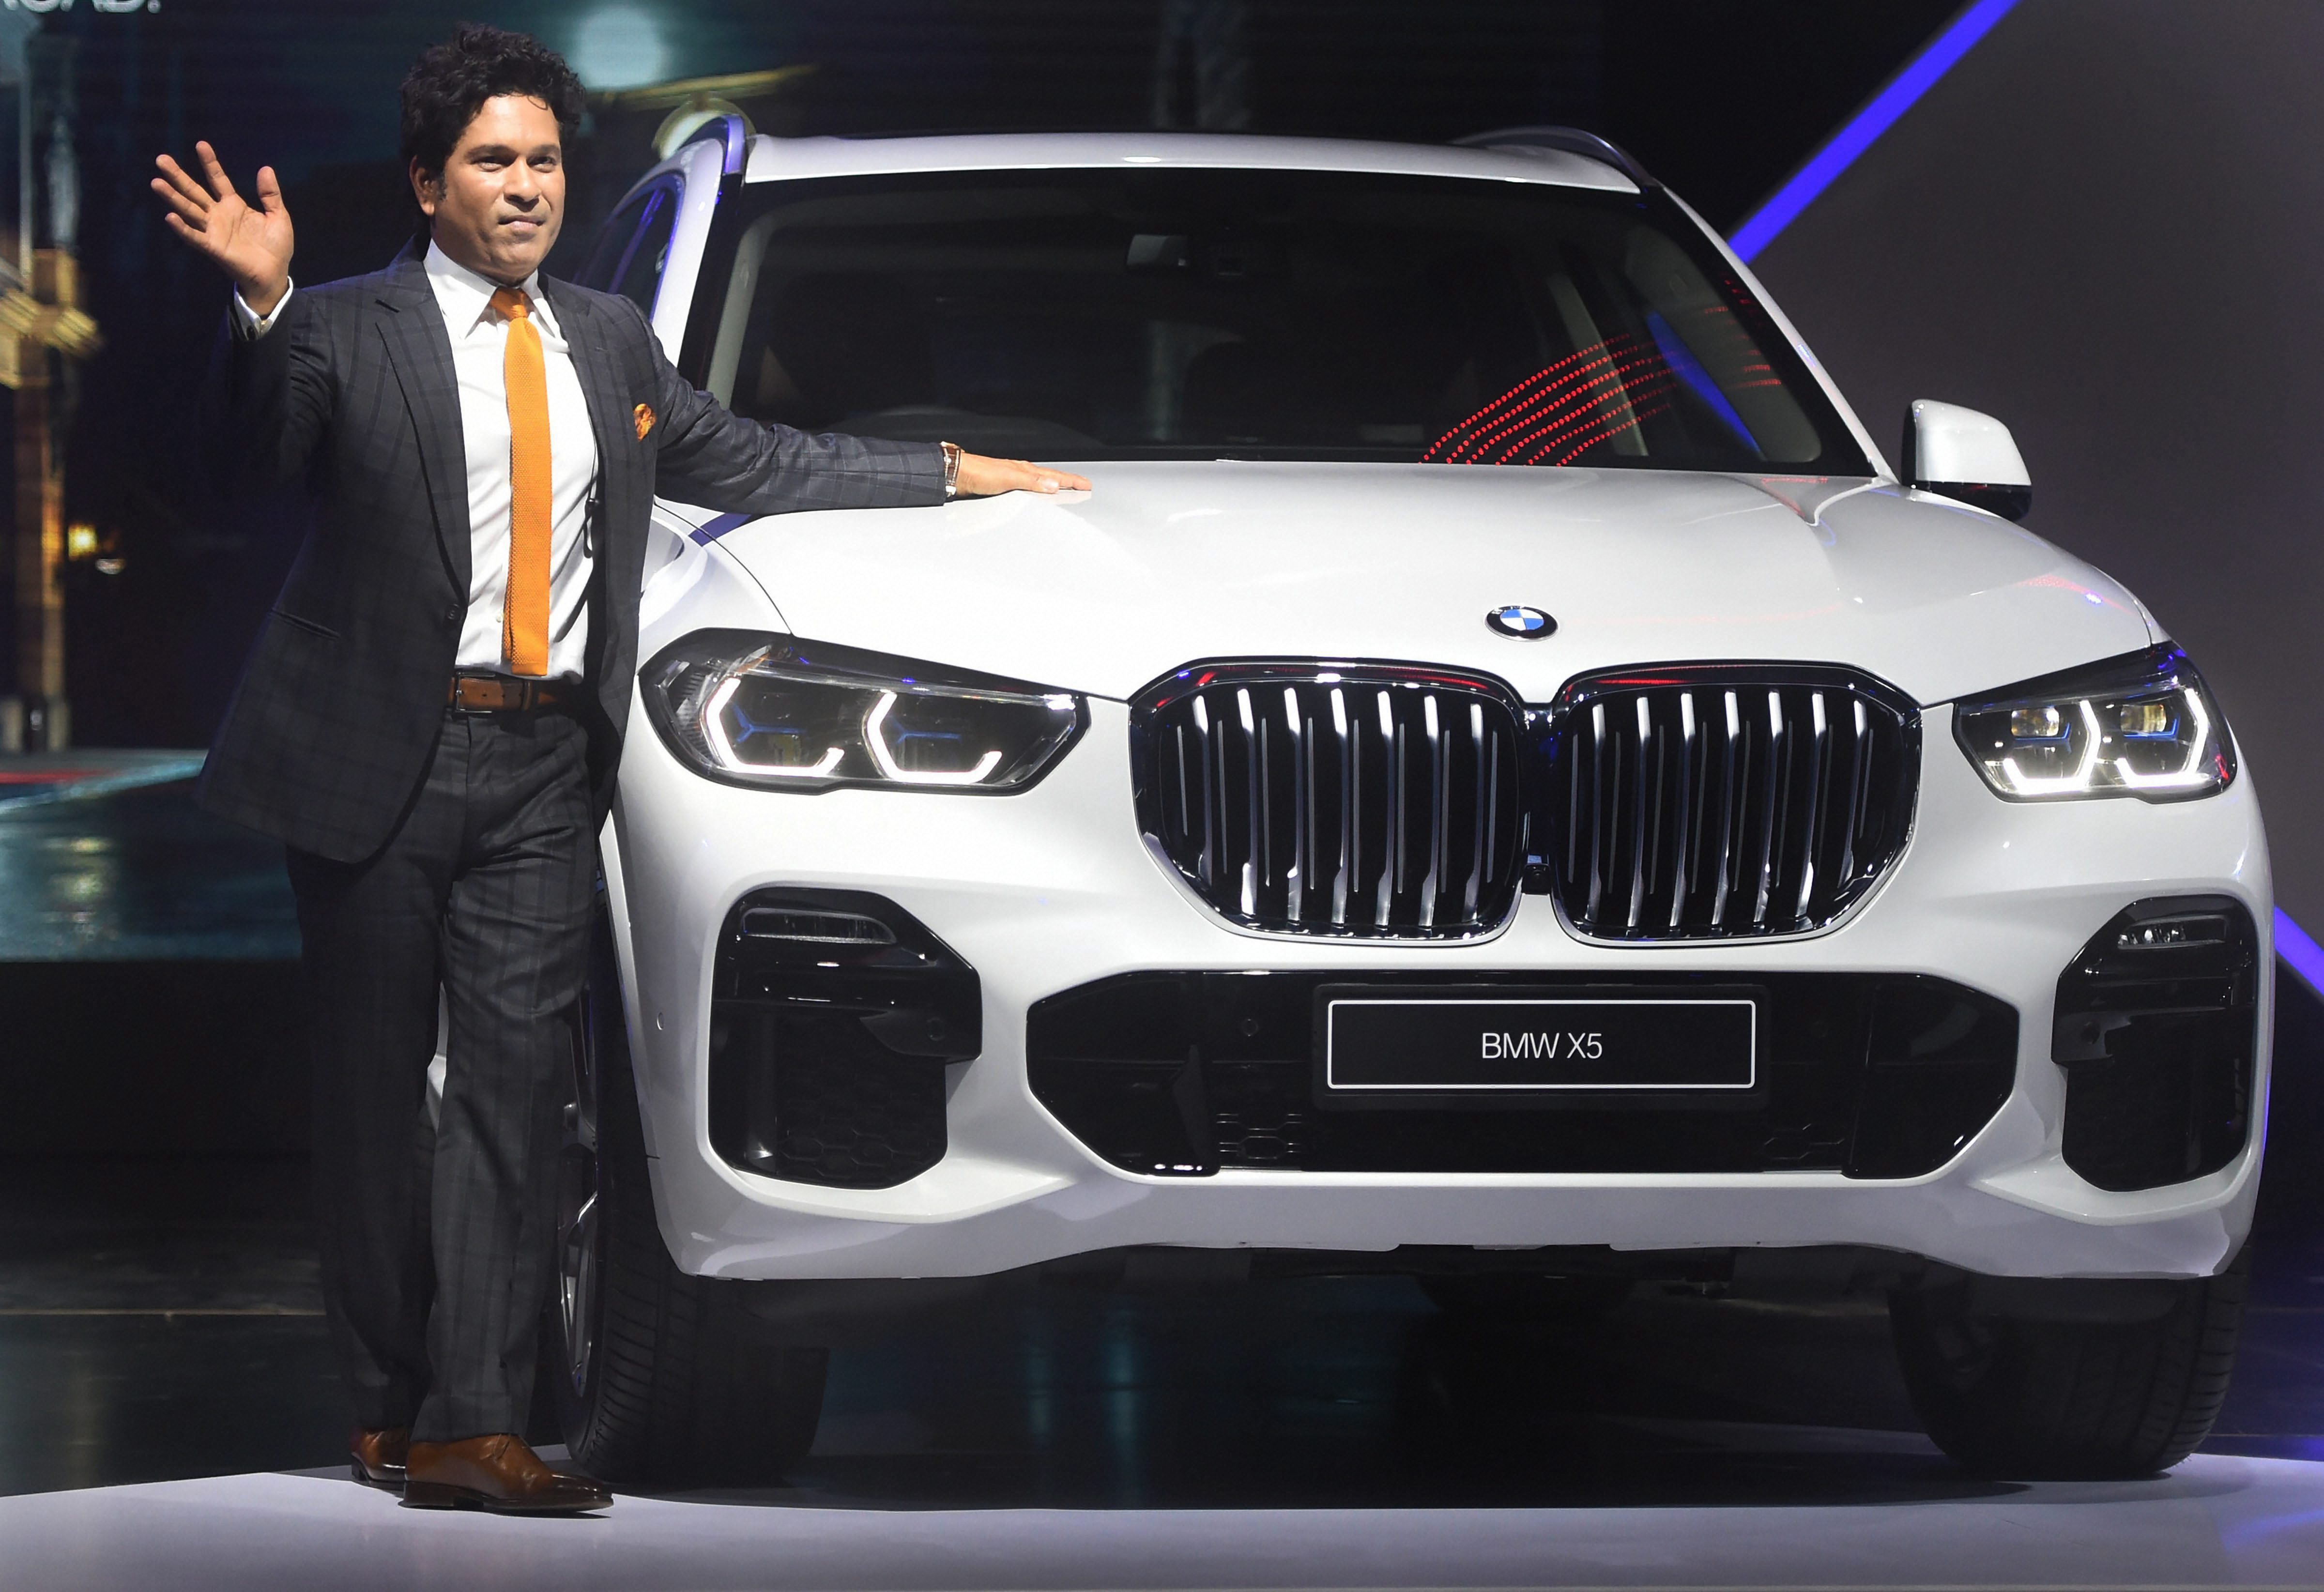 Bmw Launches New X5 Suv In India Prices Start At Rs 72 9 Lakh